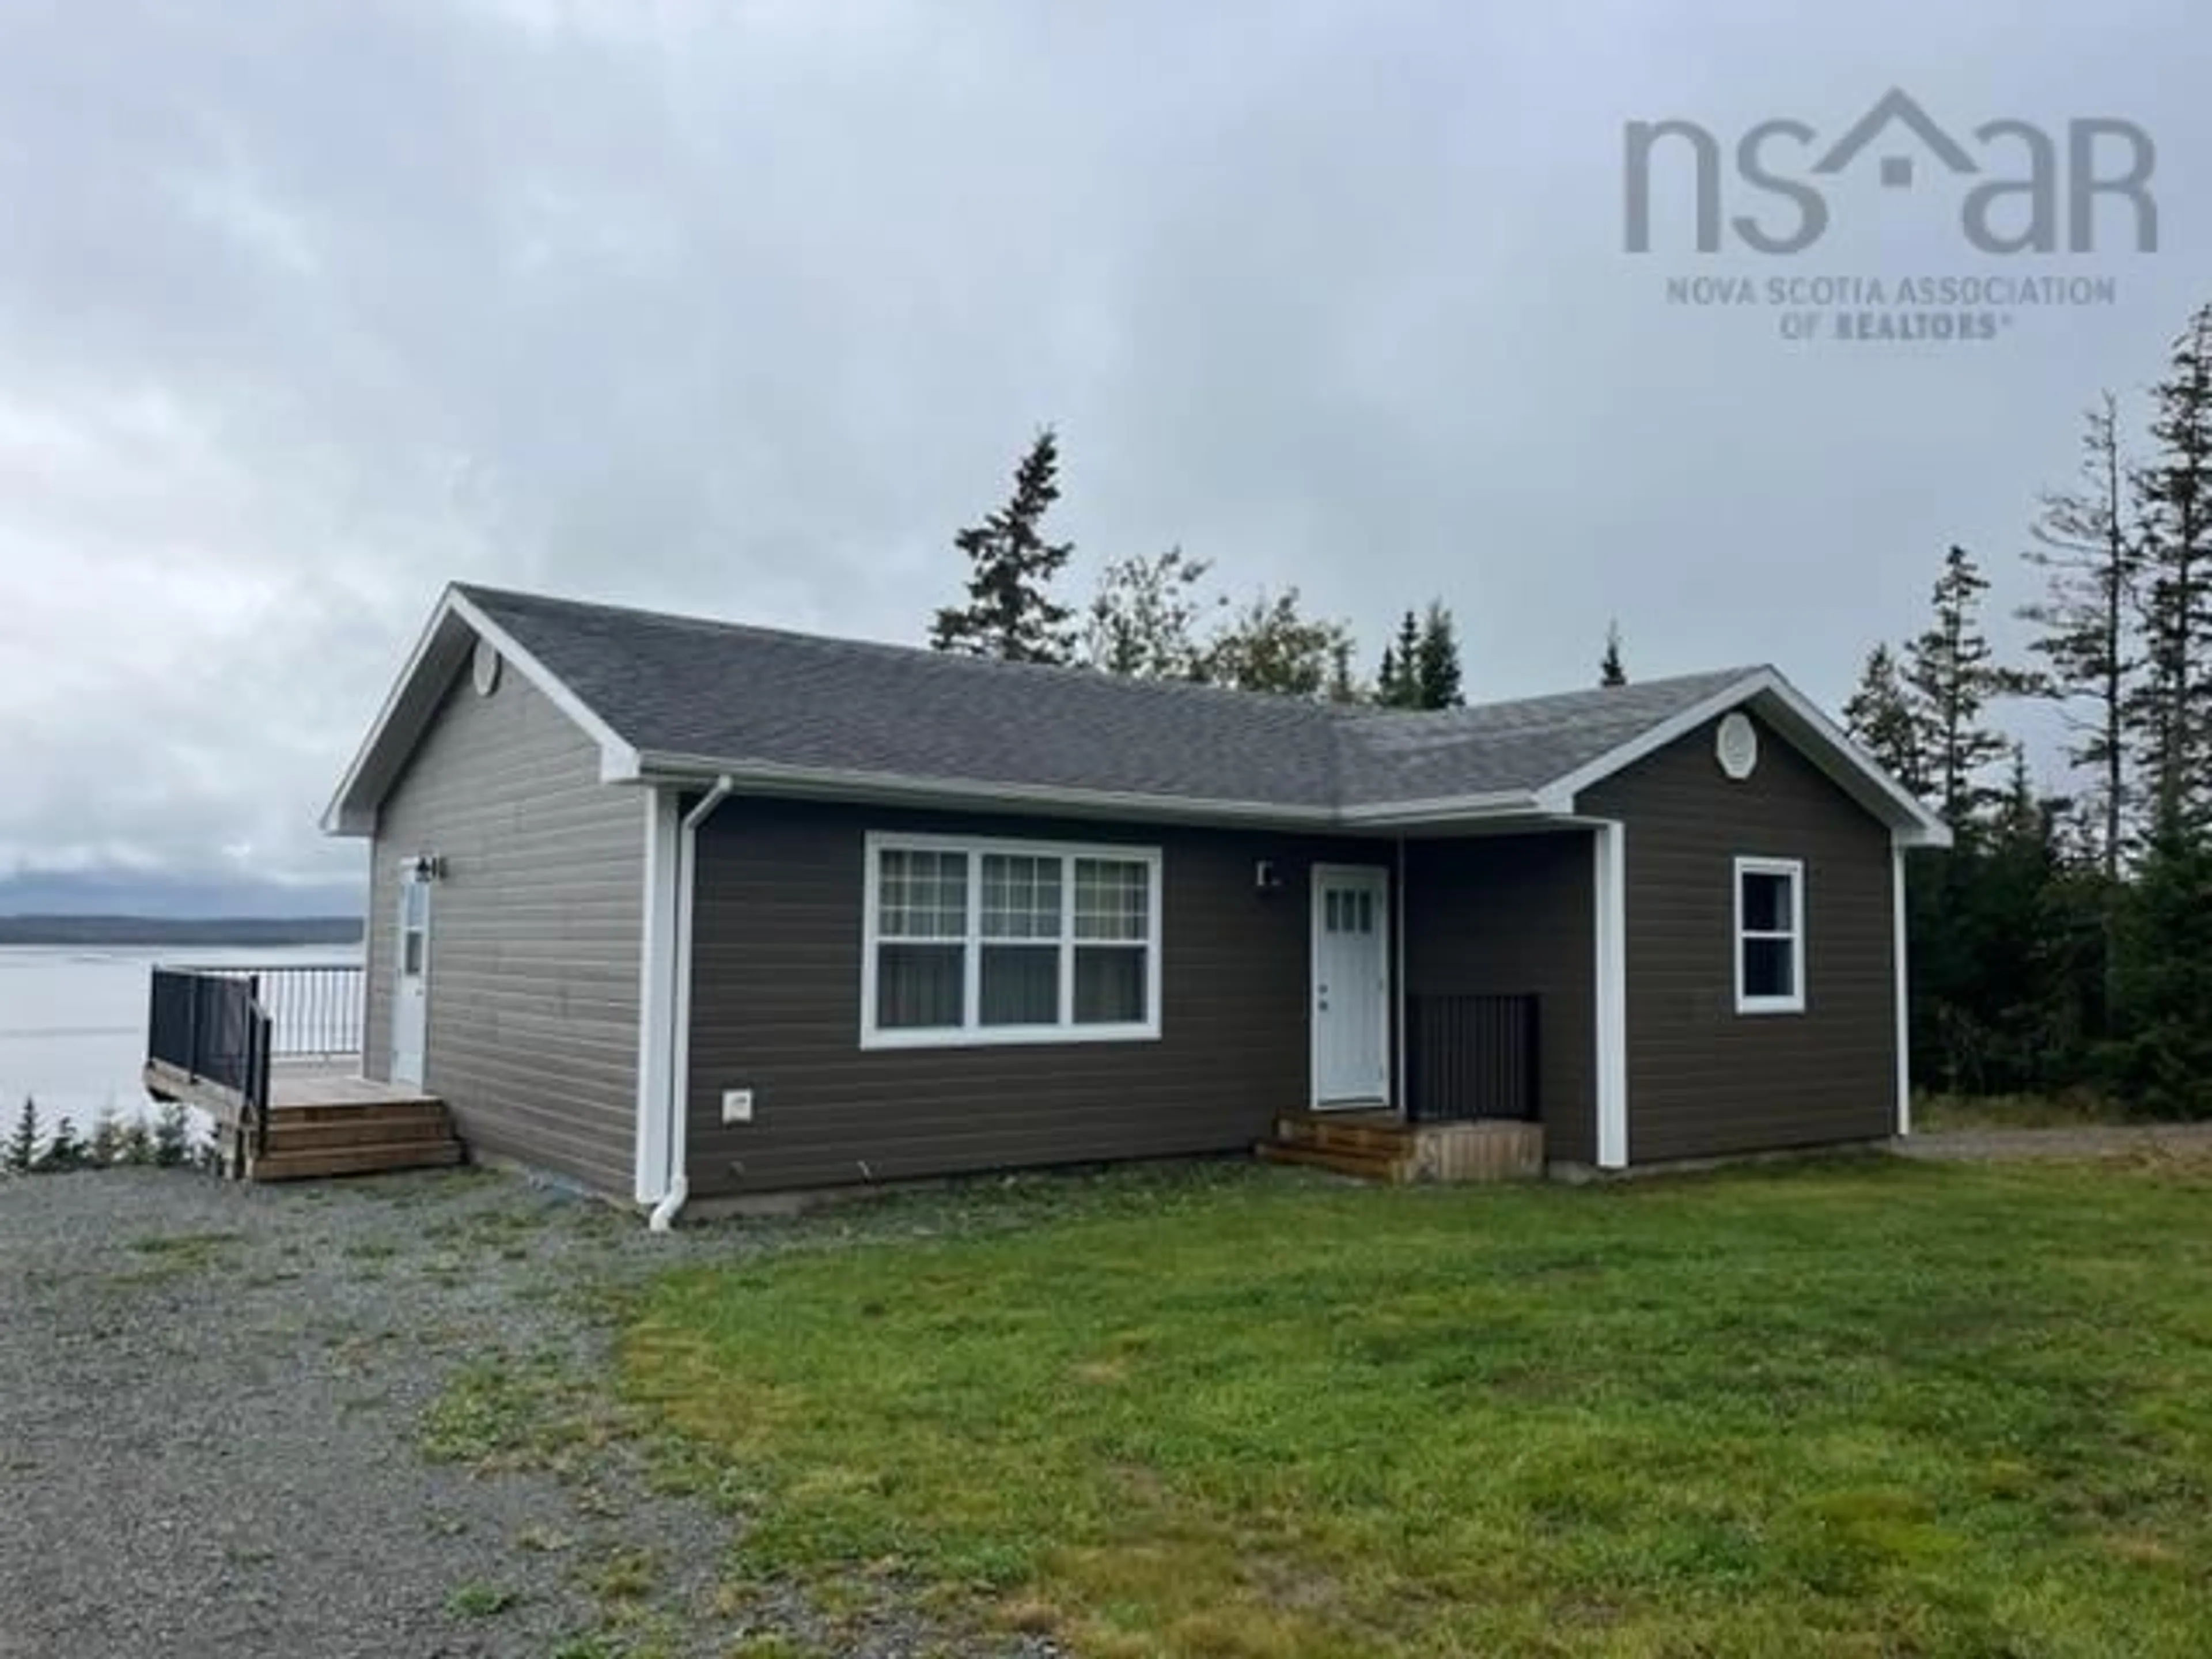 Home with unknown exterior material for 218 247 Hwy, Grand Greve Nova Scotia B0E 3B0